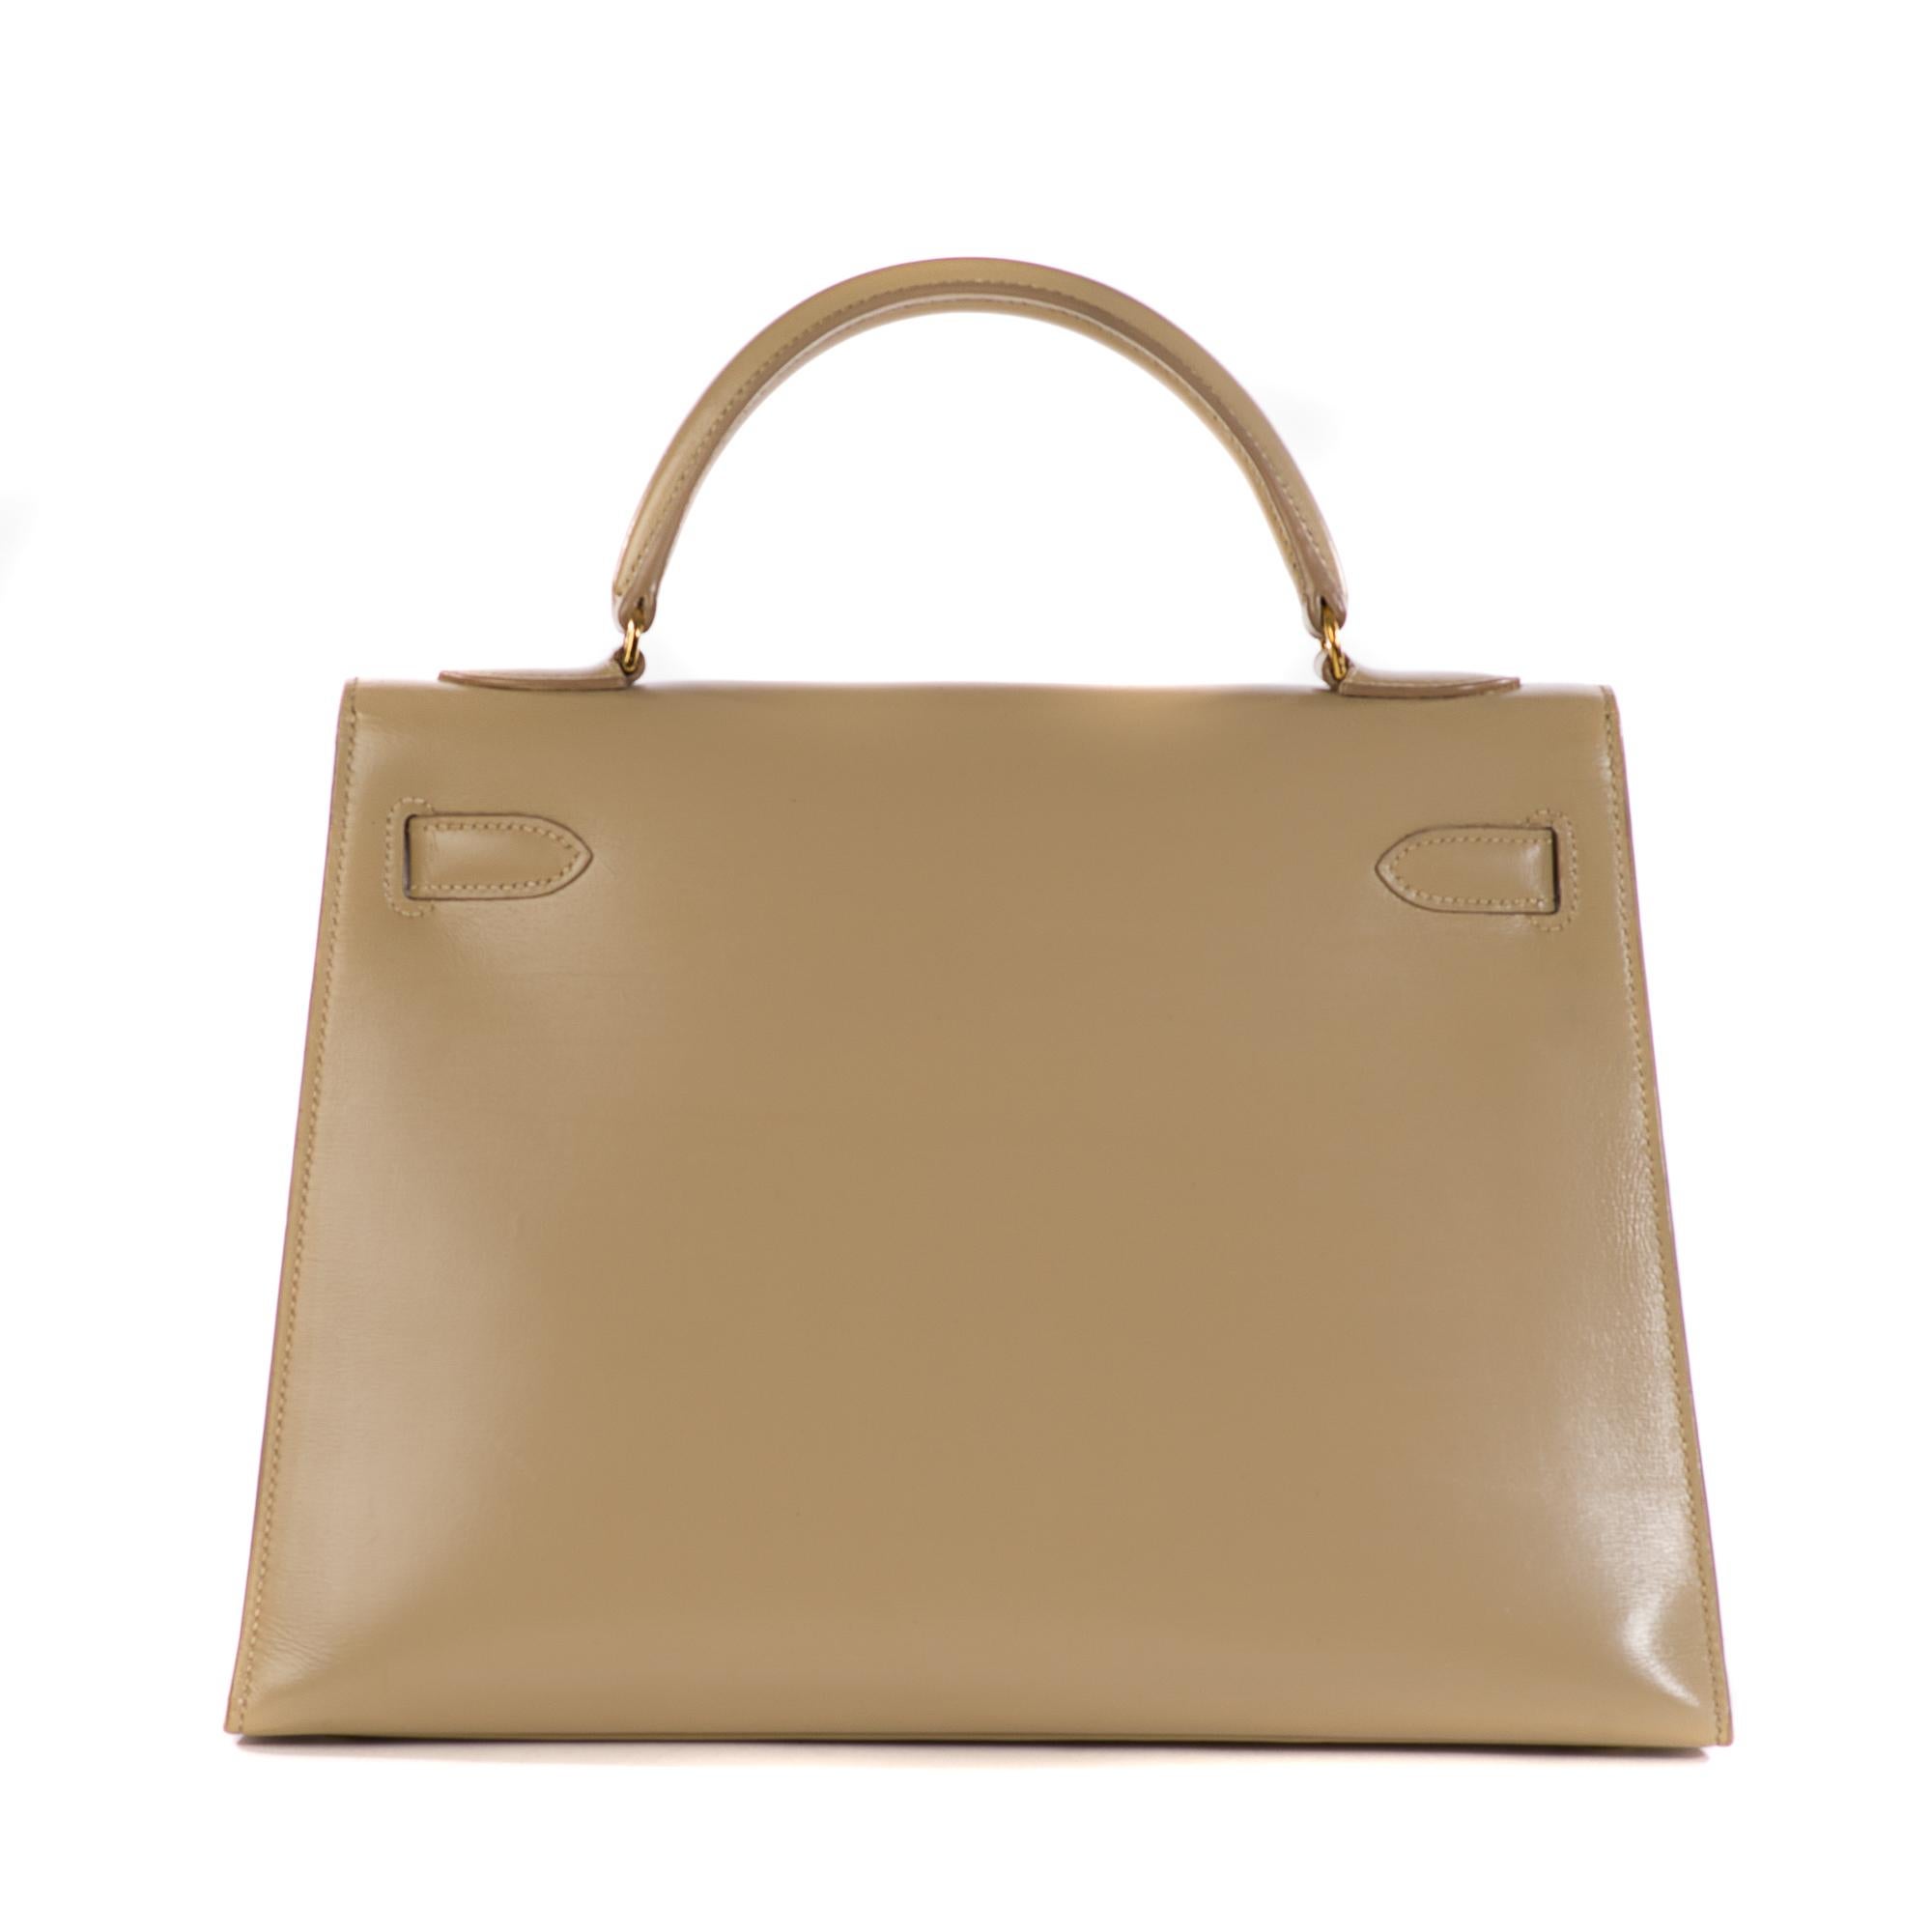 Beautiful & Rare Hermes Kelly Sellier 32cm in beige box leather with gold hardware. 
Hermès Paris « Made in France